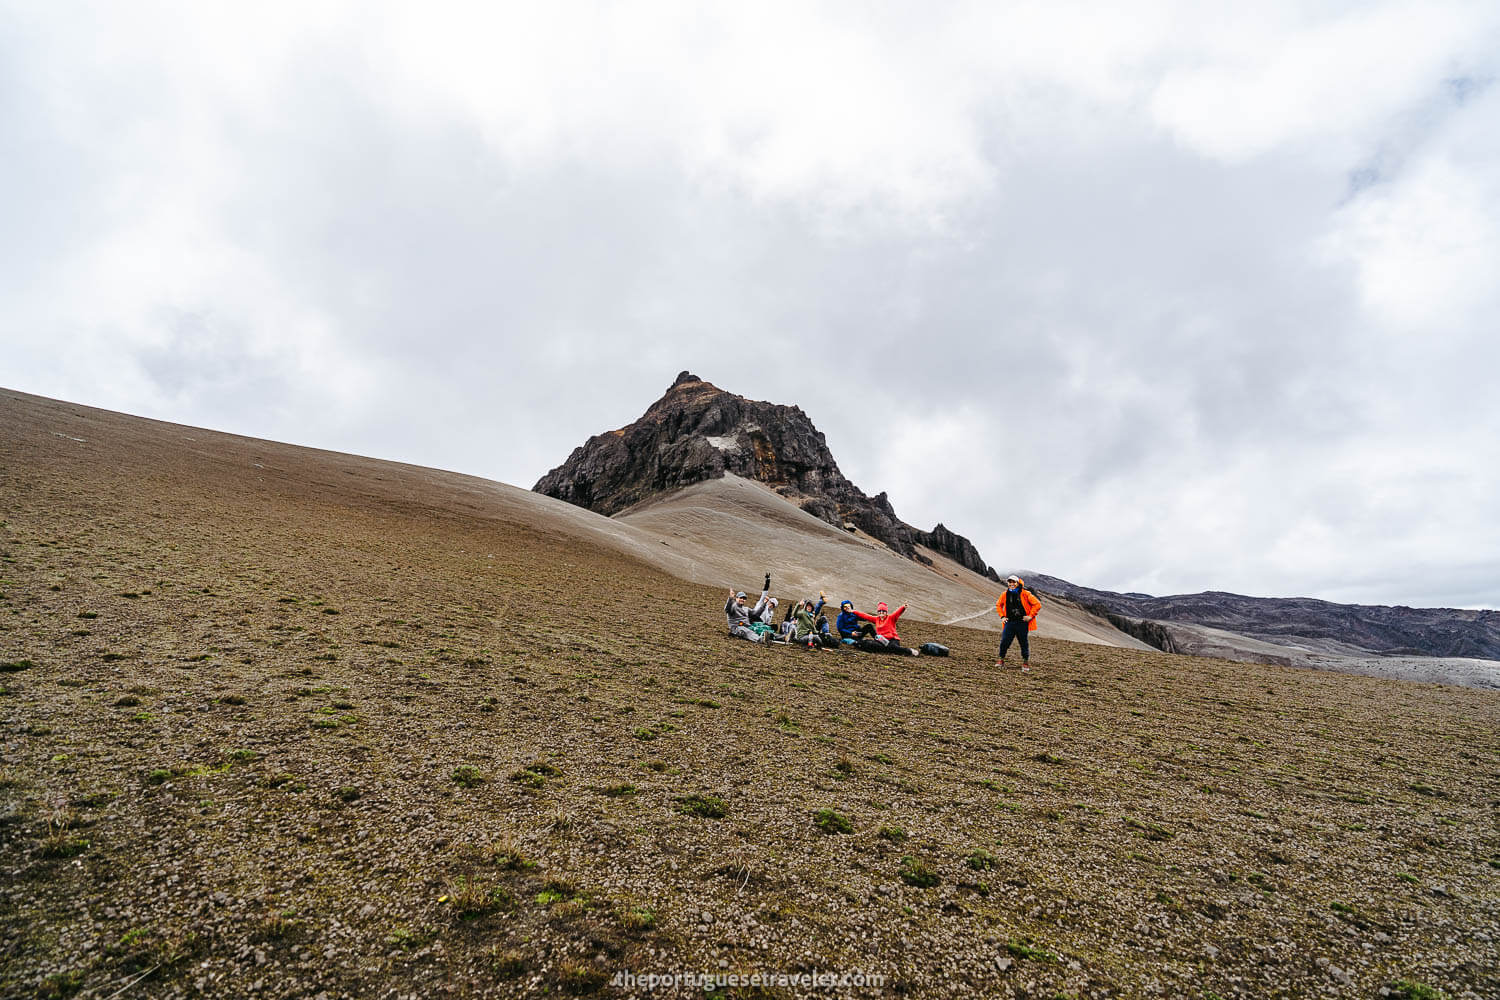 The Cerro Morurco and a group of hikers